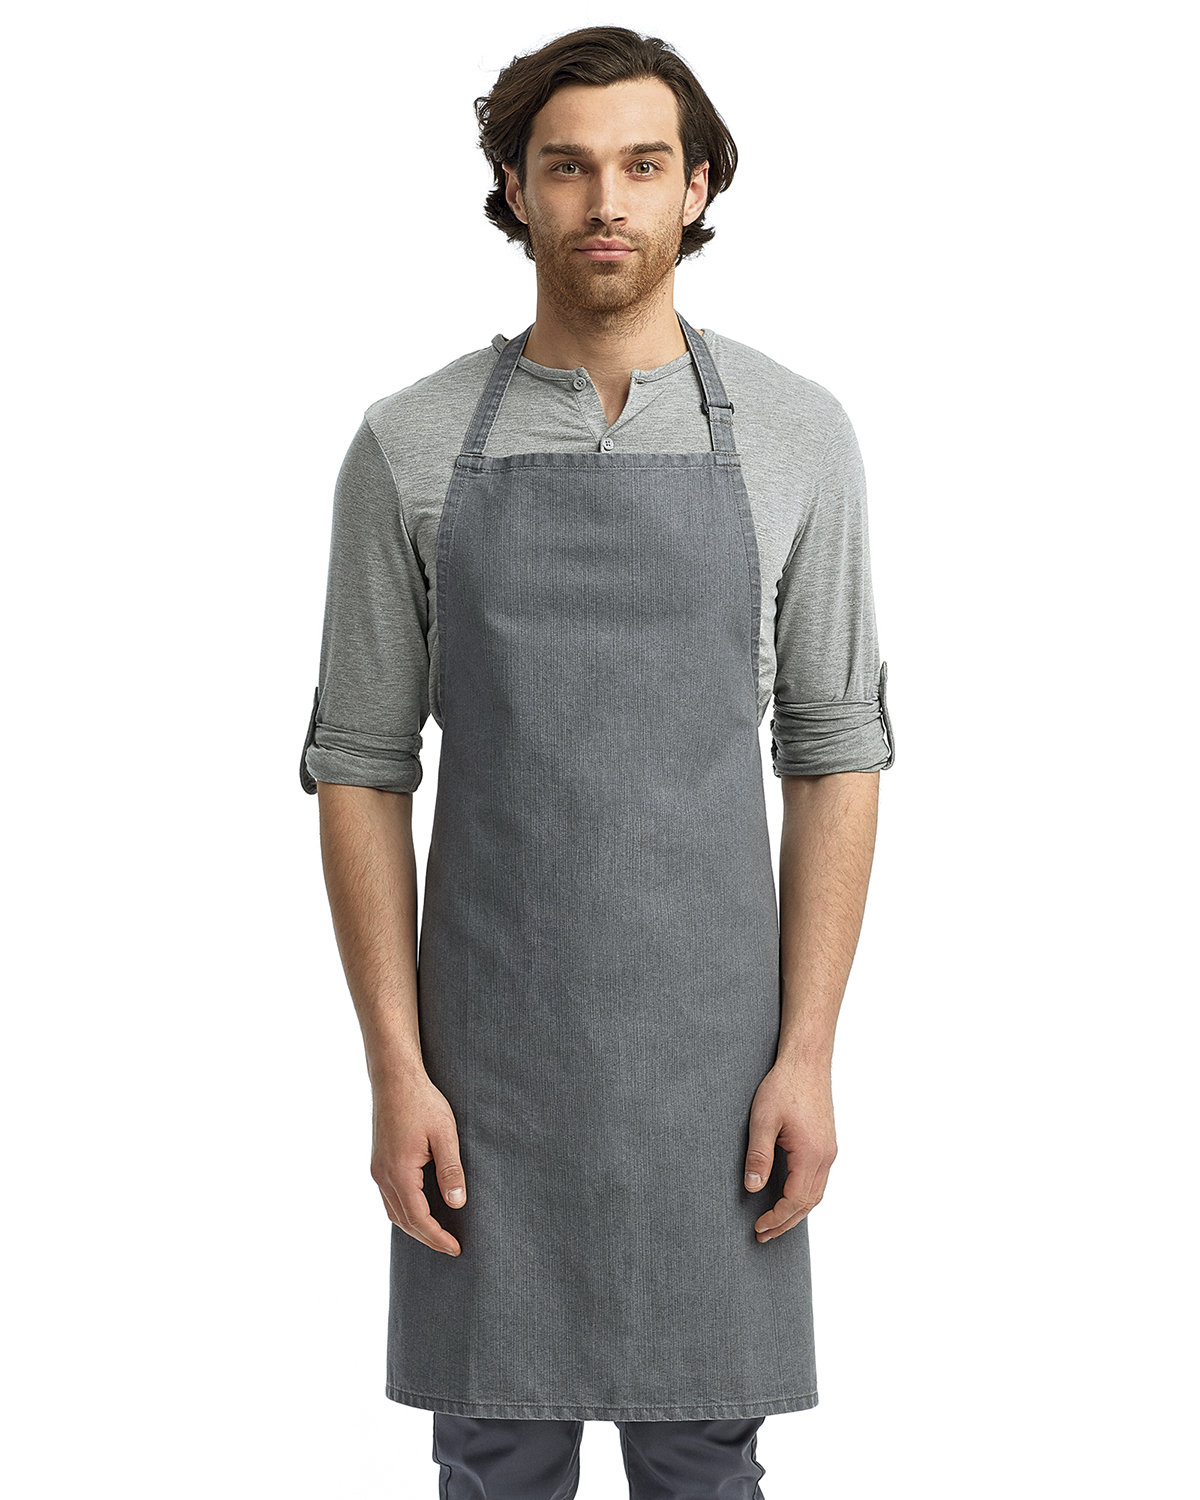 Artisan Collection by Reprime "Colours" Sustainable Bib Apron GREY DENIM 